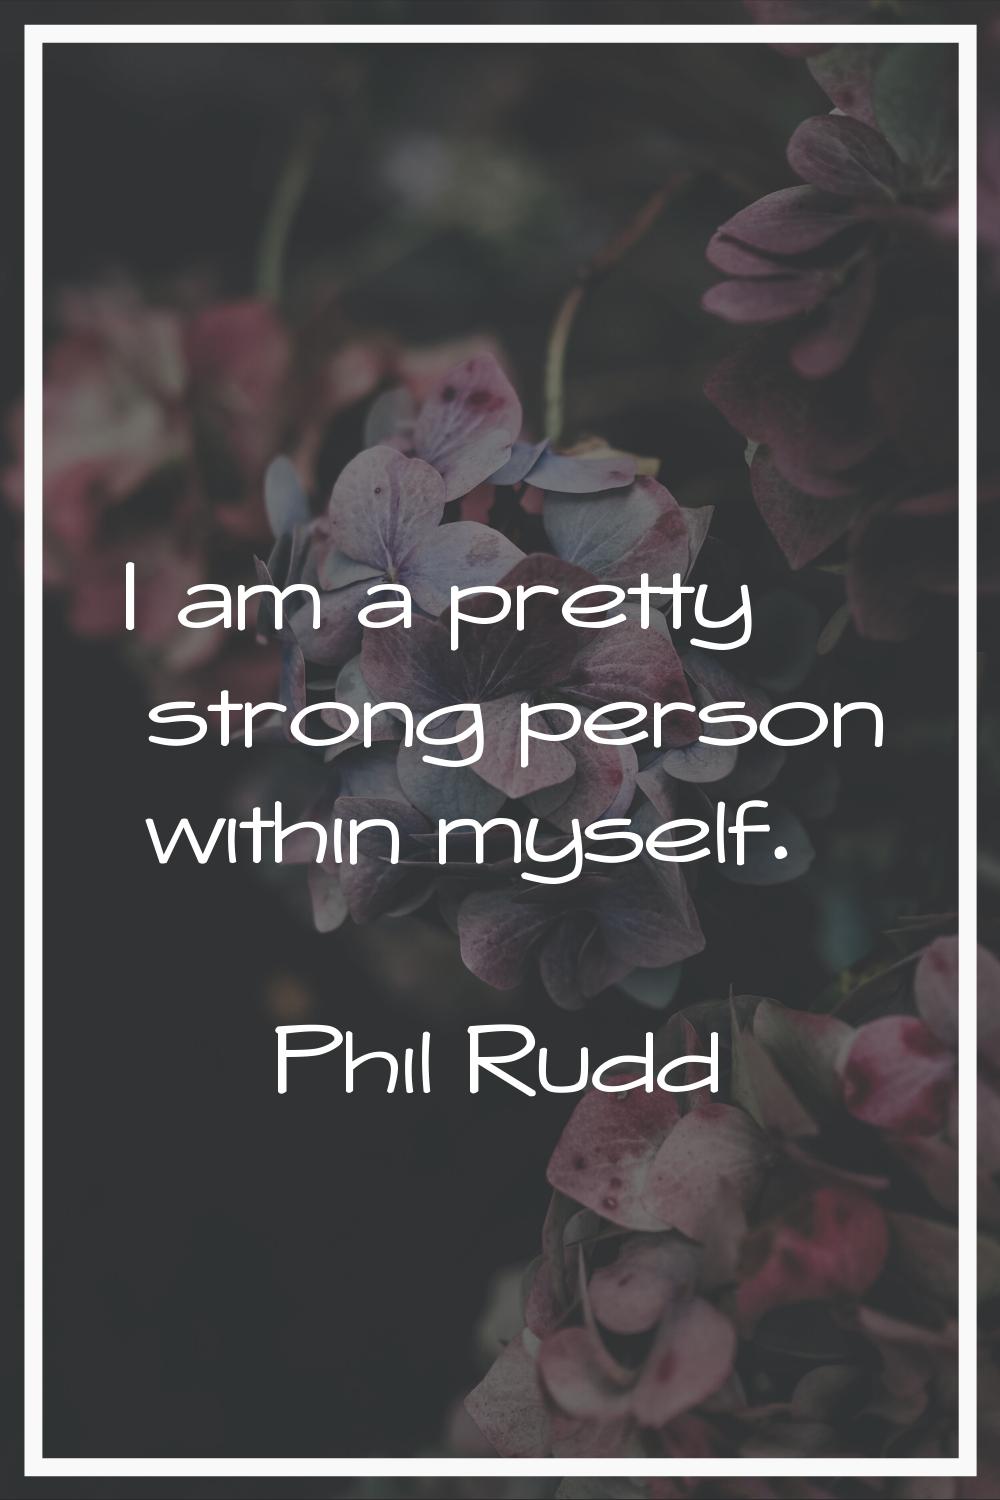 I am a pretty strong person within myself.